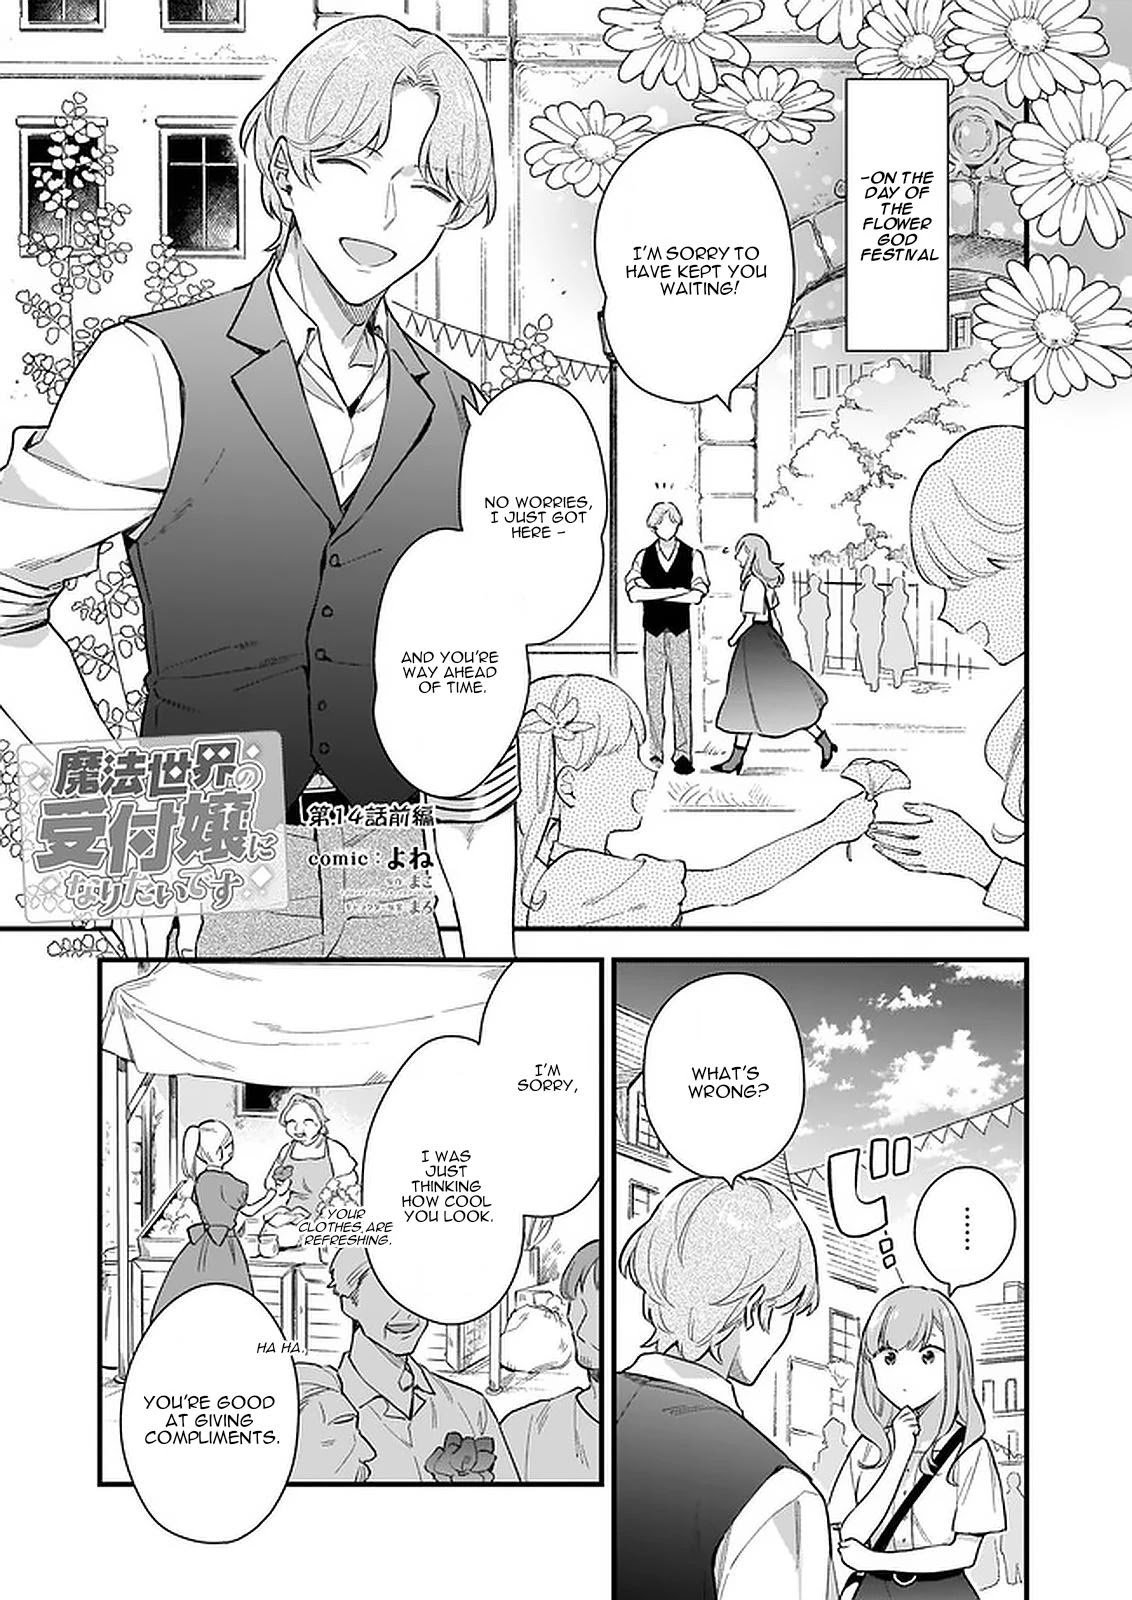 Read I Want to Be a Receptionist of The Magic World! Manga English [New ...